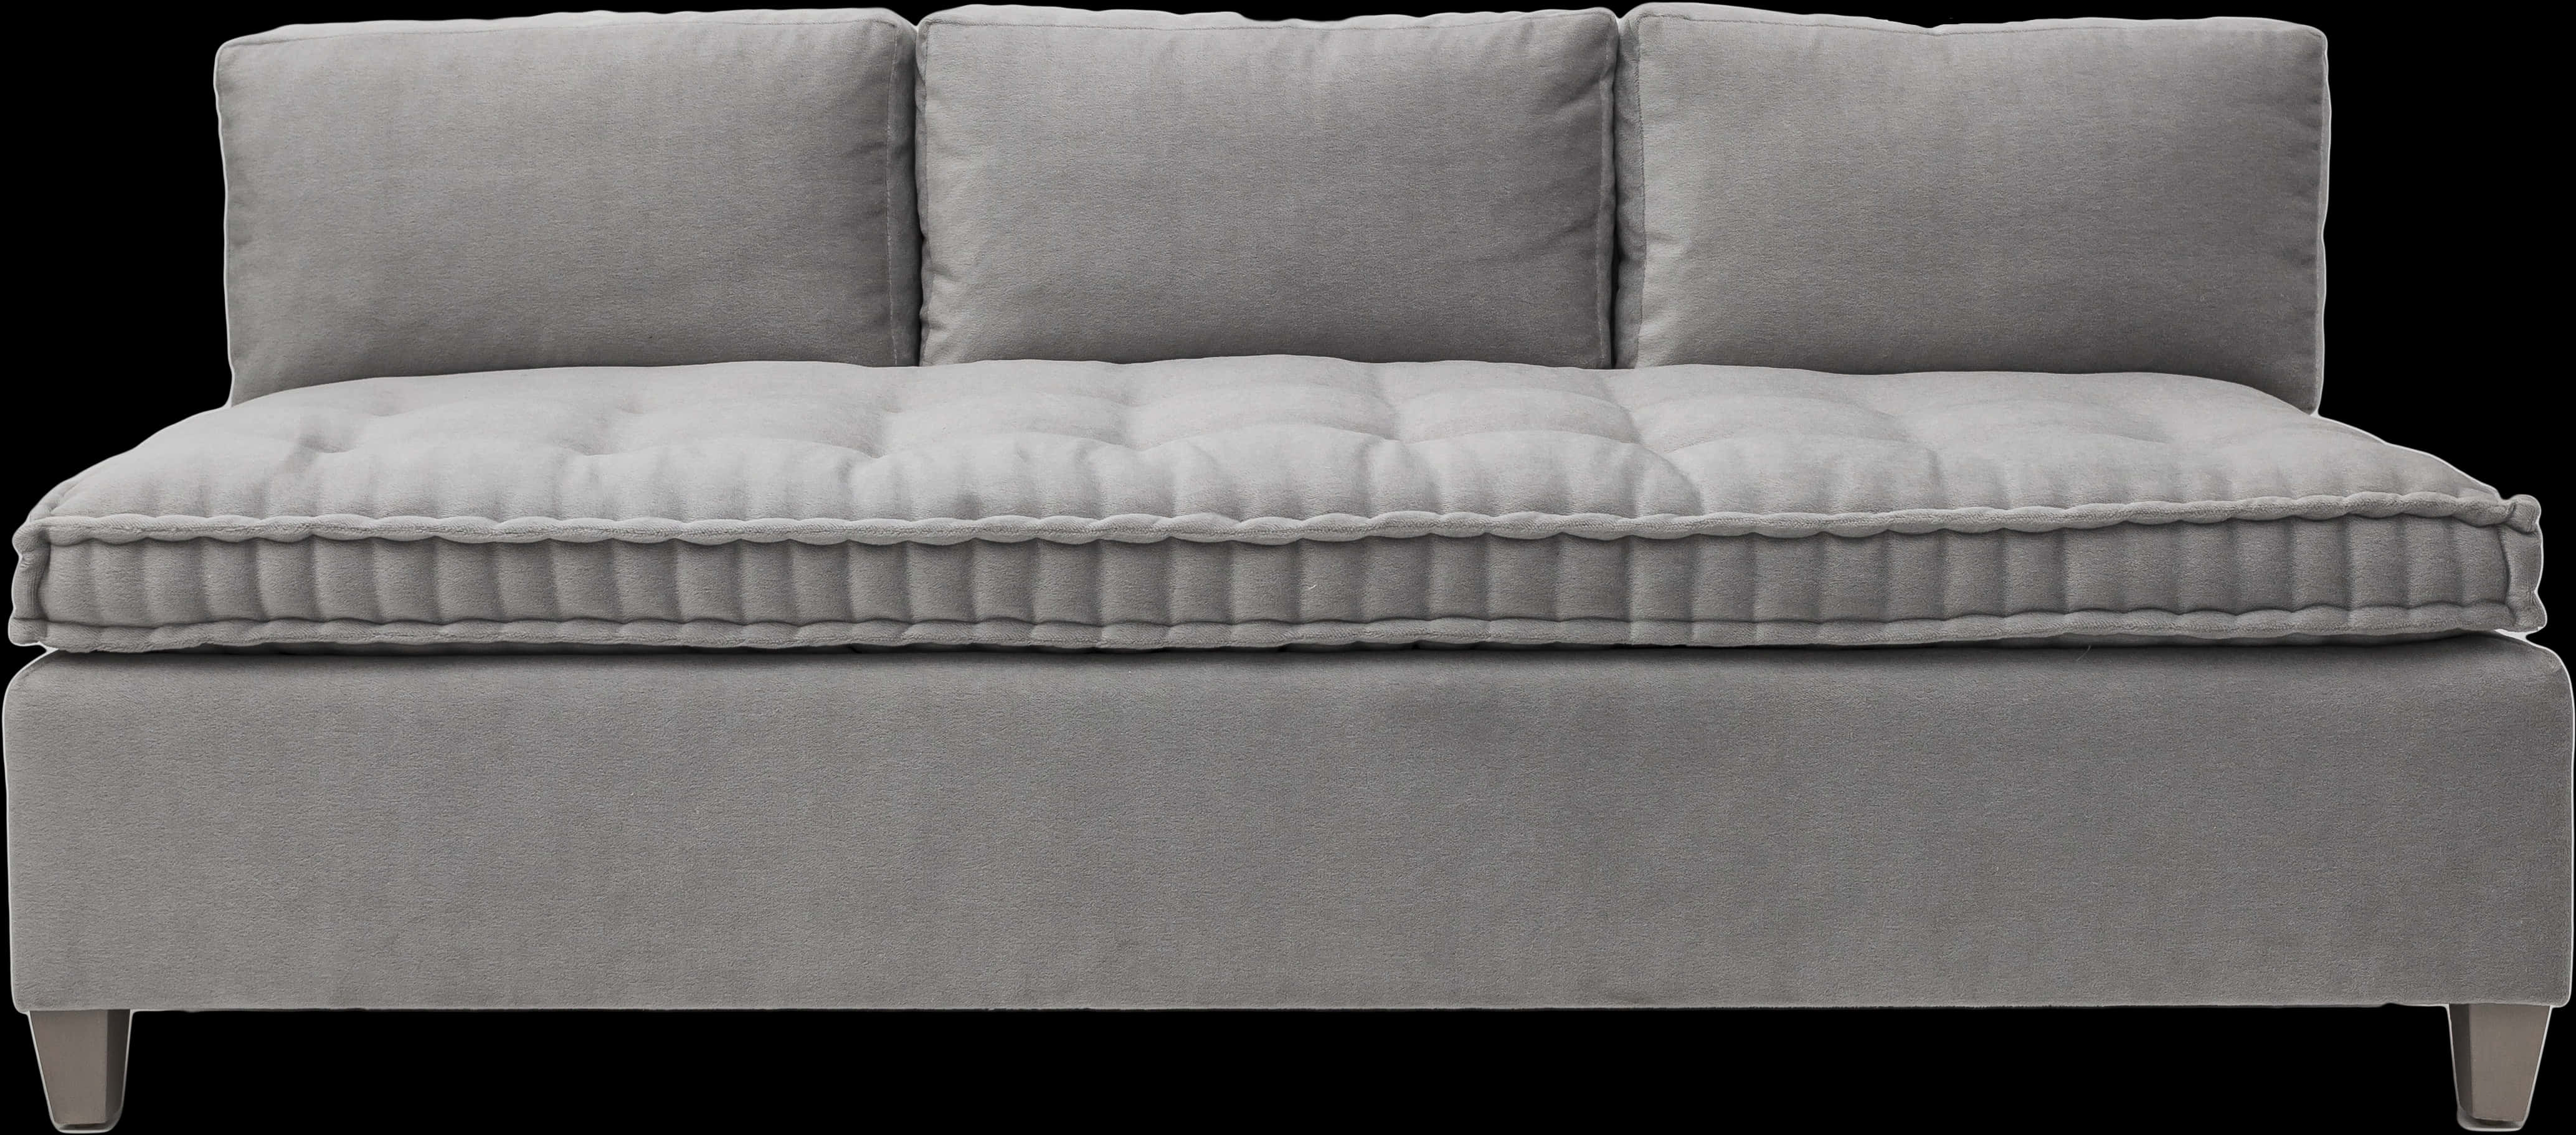 A Grey Couch With Pillows